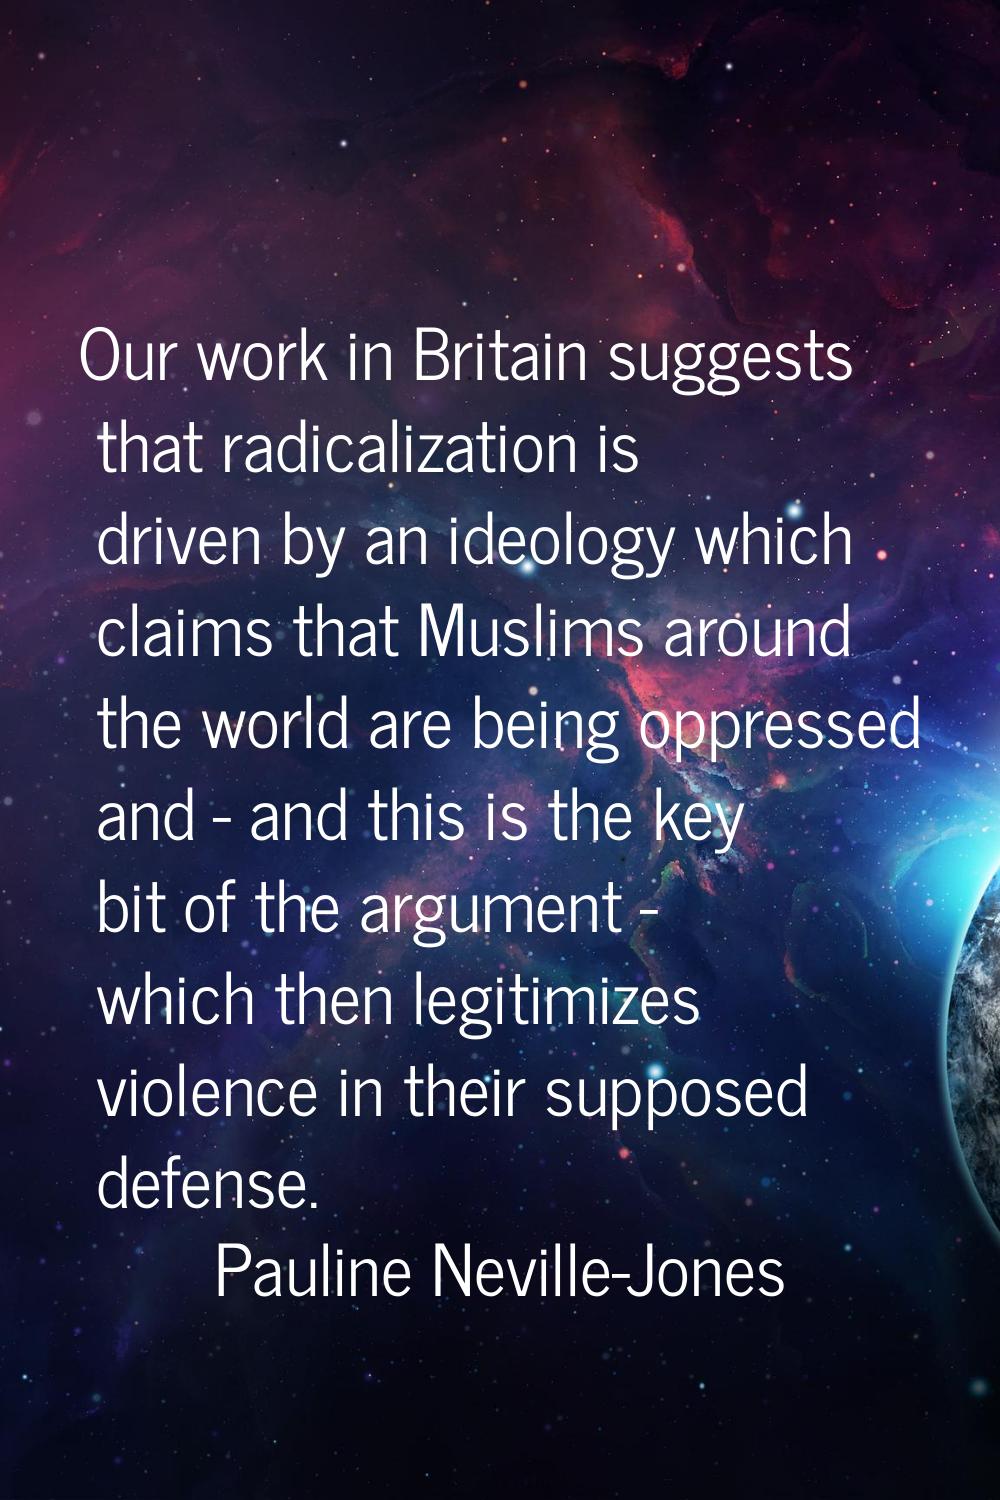 Our work in Britain suggests that radicalization is driven by an ideology which claims that Muslims